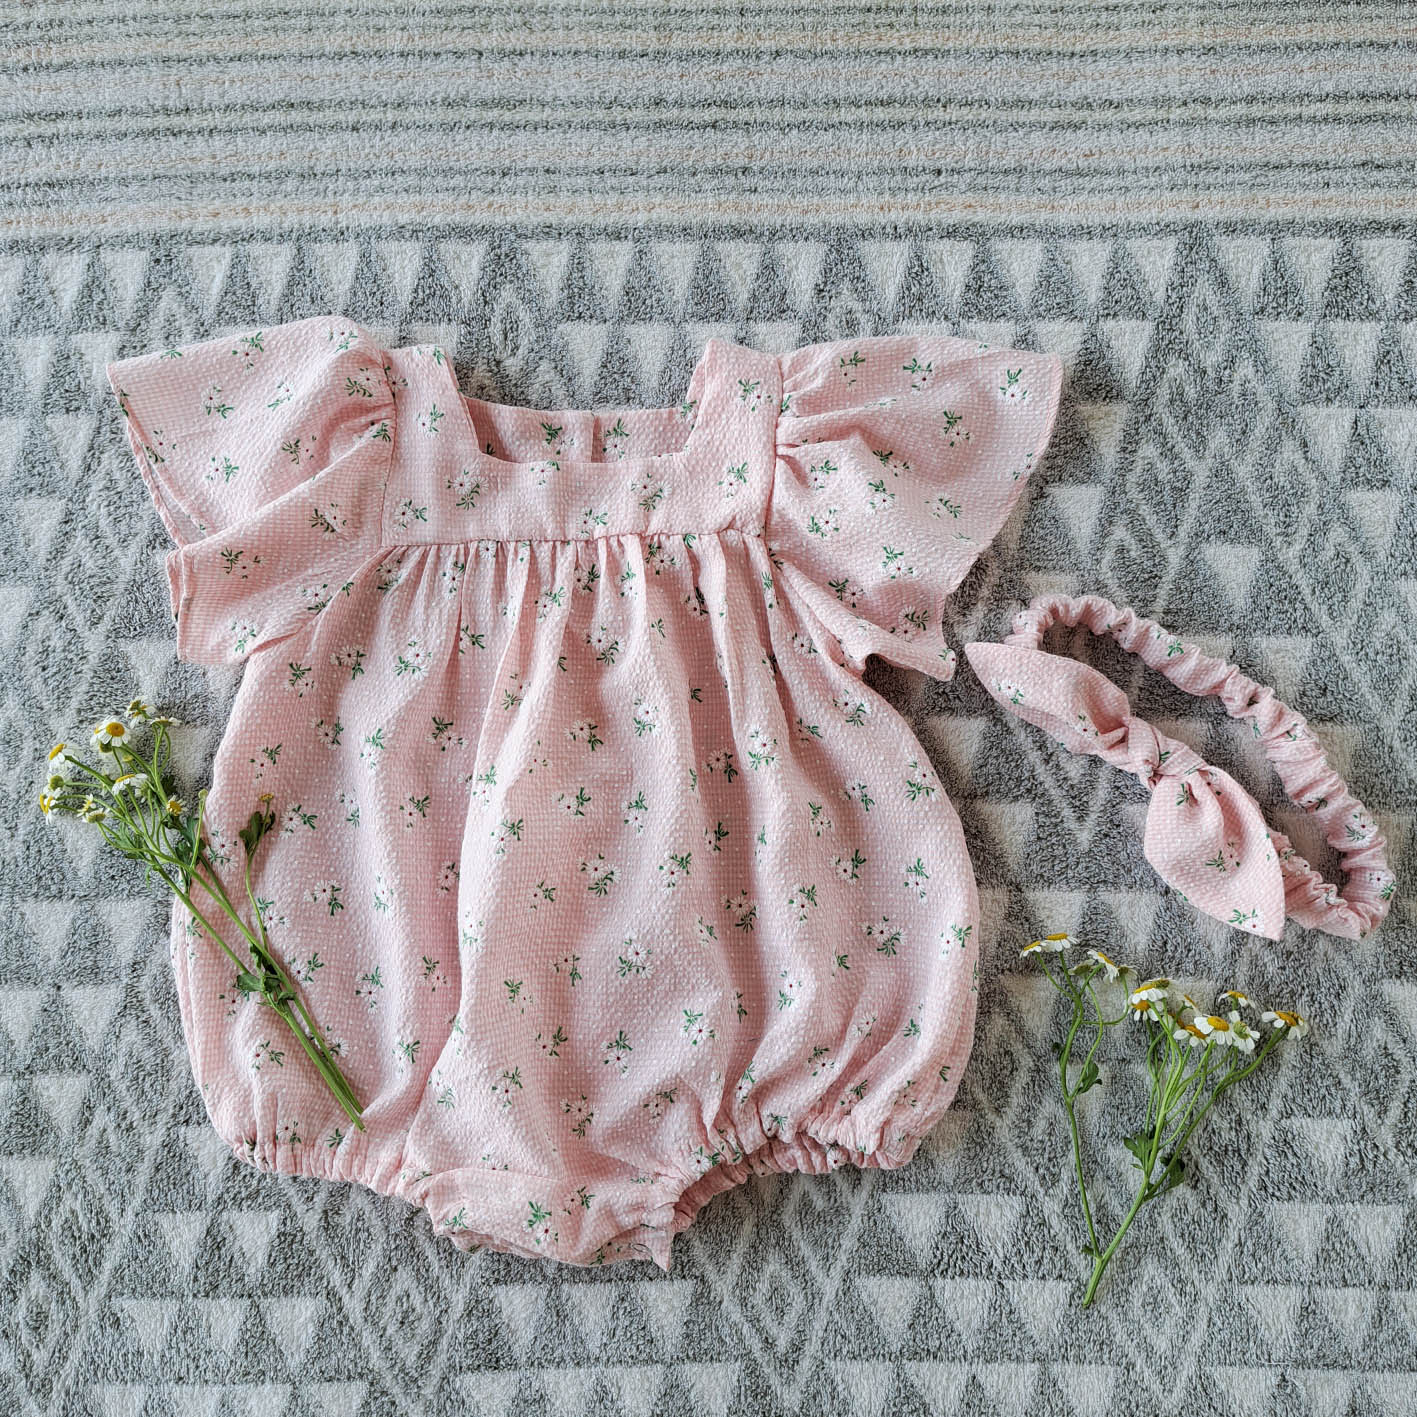 BUTTERFLY SLEEVES DAISY ROMPER 100% PRINTED COTTON*HEADBAND NOT INCLUDED*PRE-ORDER SHIP OUT 4-5 FEB